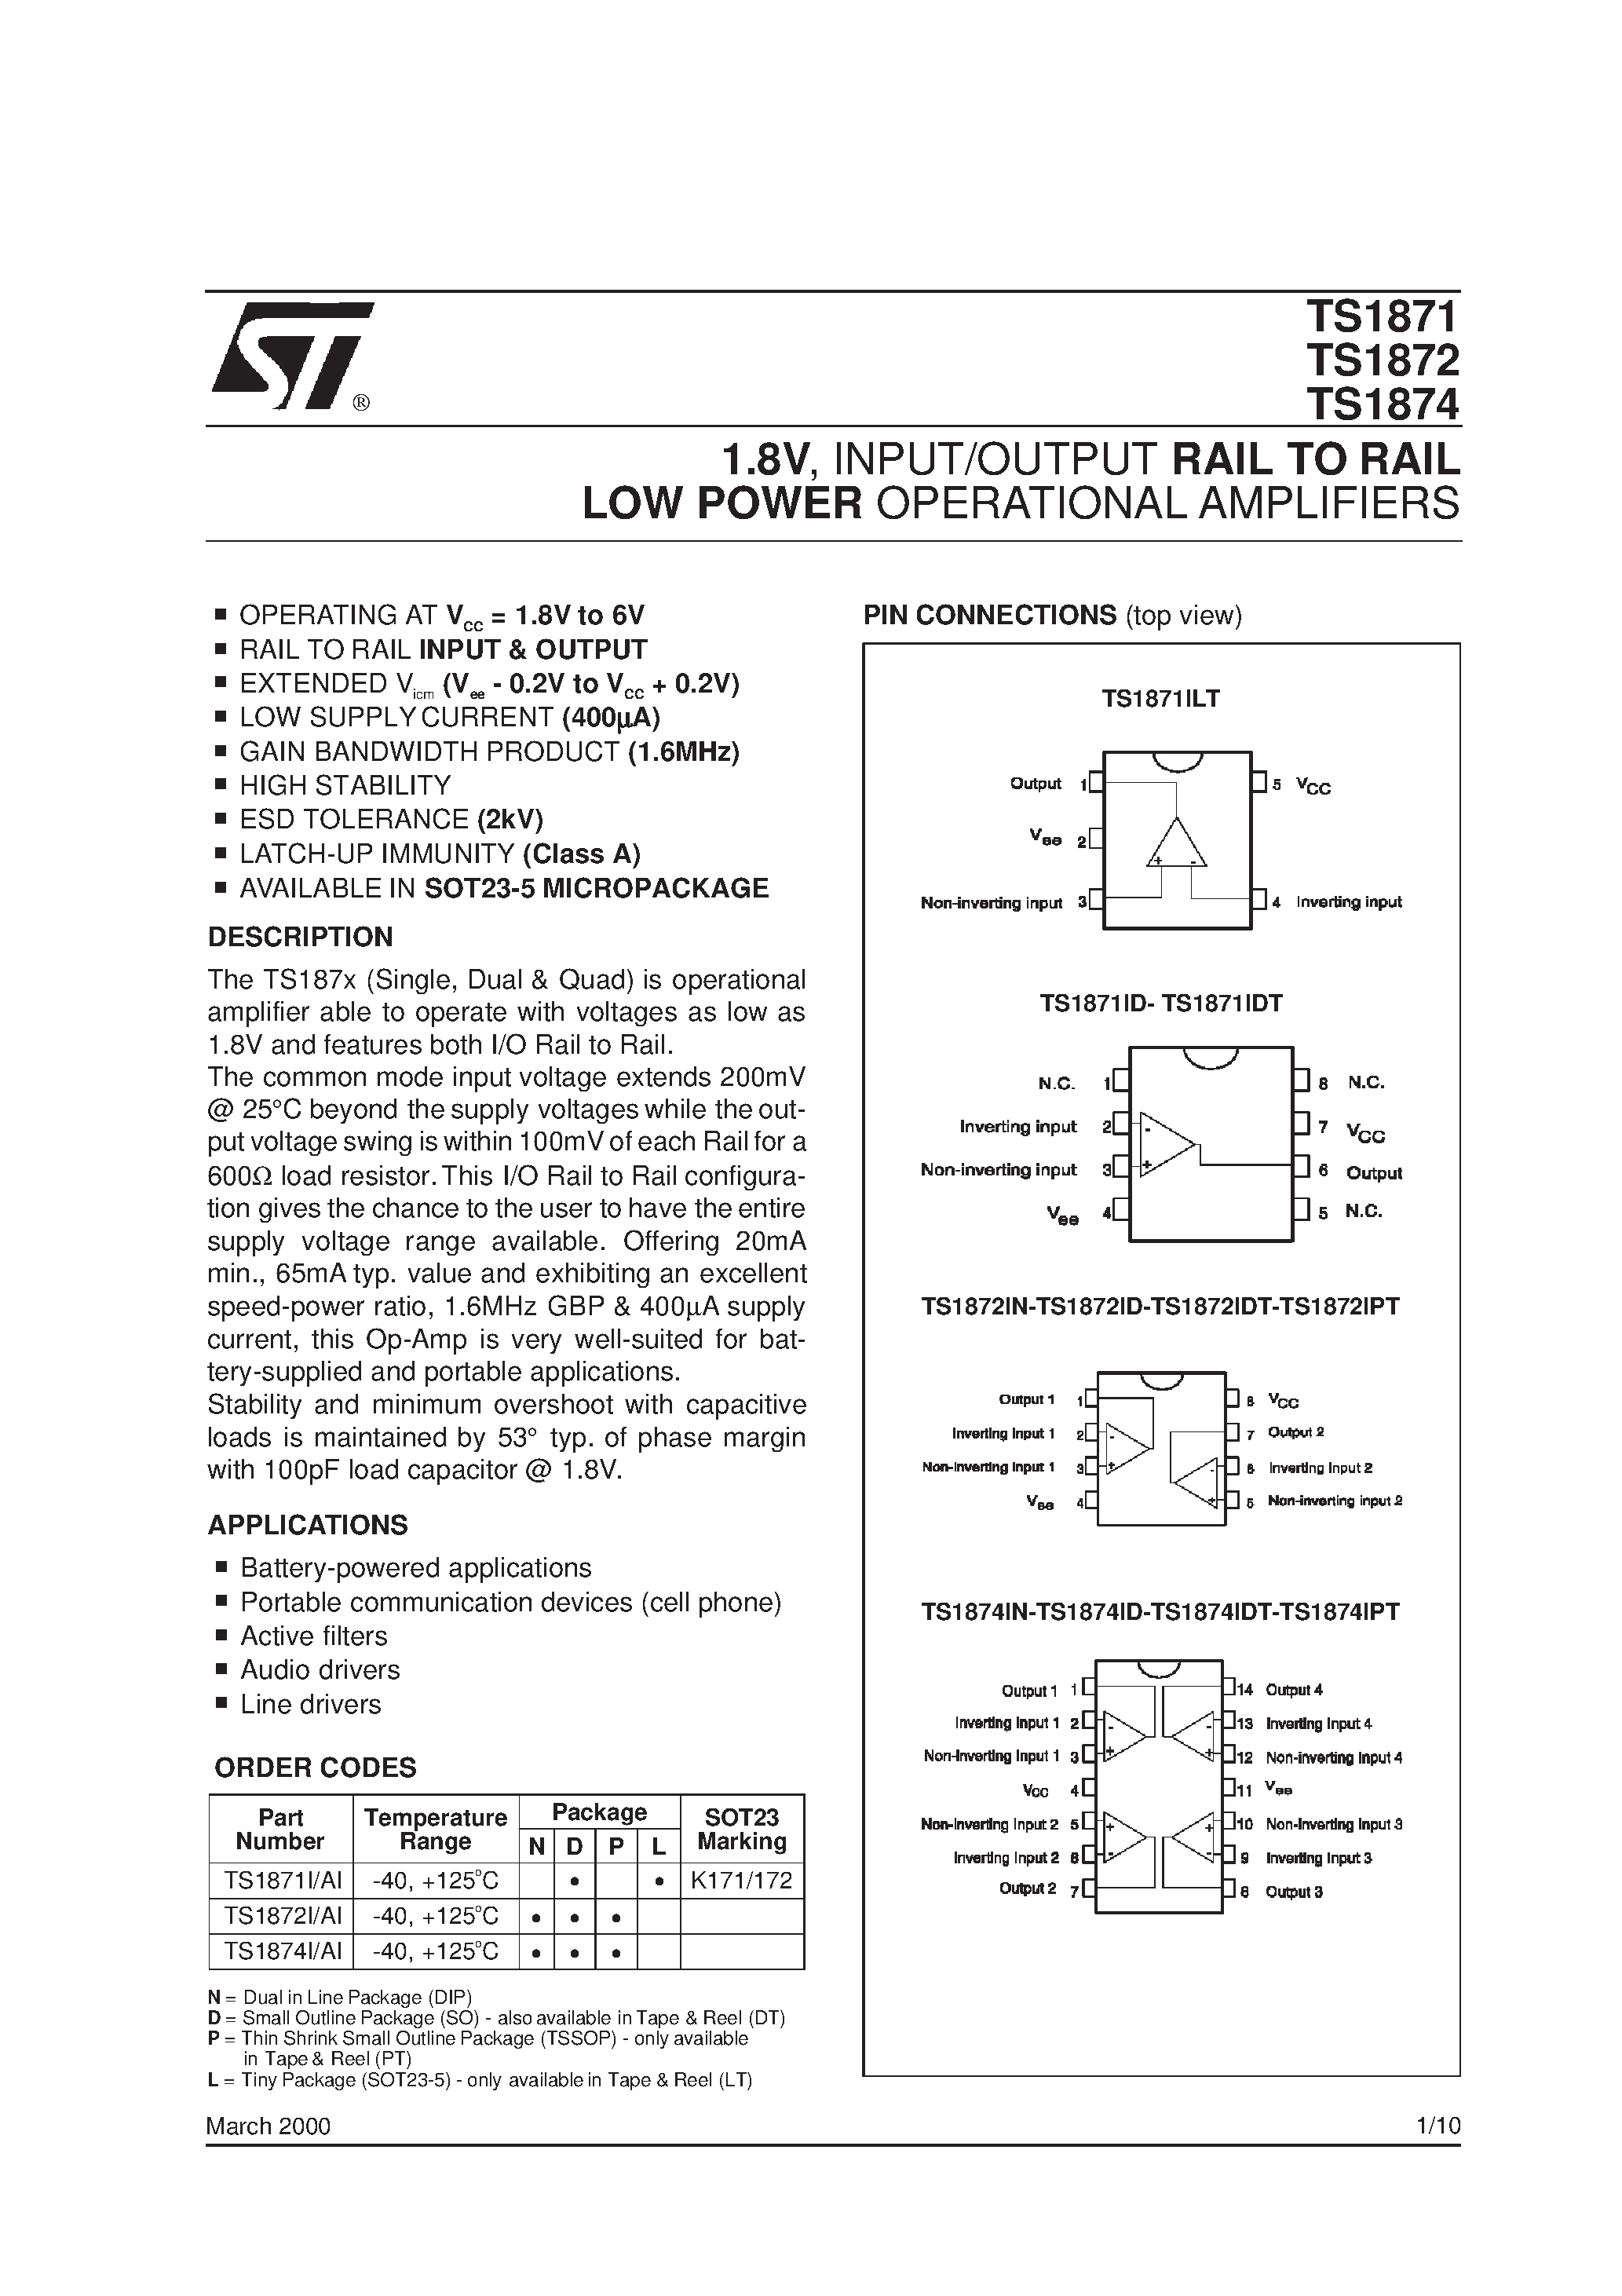 Datasheet TS1874 - 1.8V/ INPUT/OUTPUT RAIL TO RAIL LOW POWER OPERATIONAL AMPLIFIERS page 1